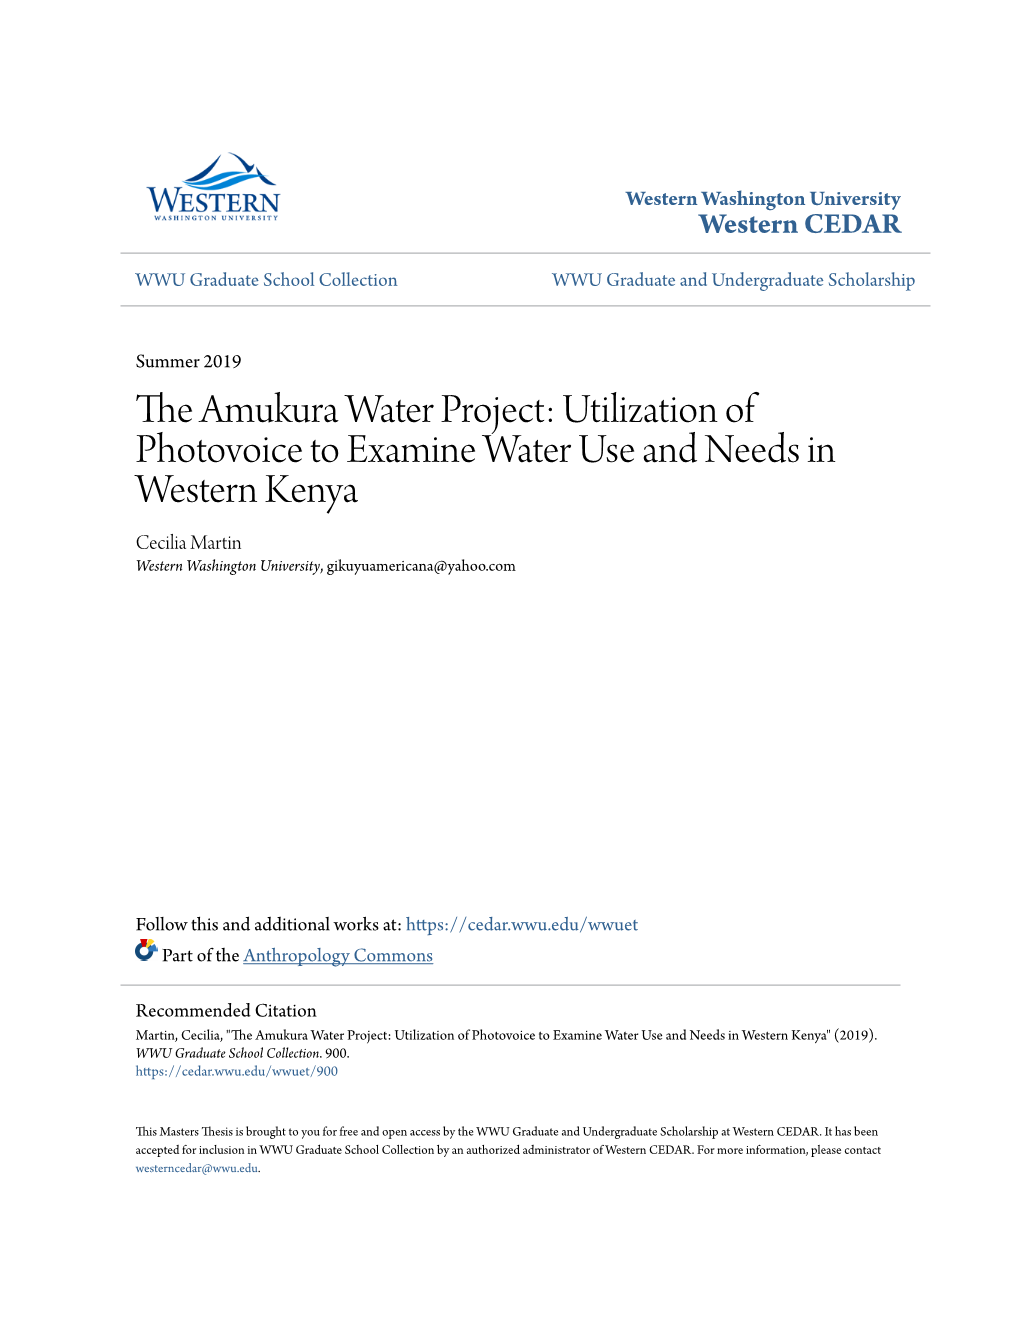 The Amukura Water Project: Utilization of Photovoice to Examine Water